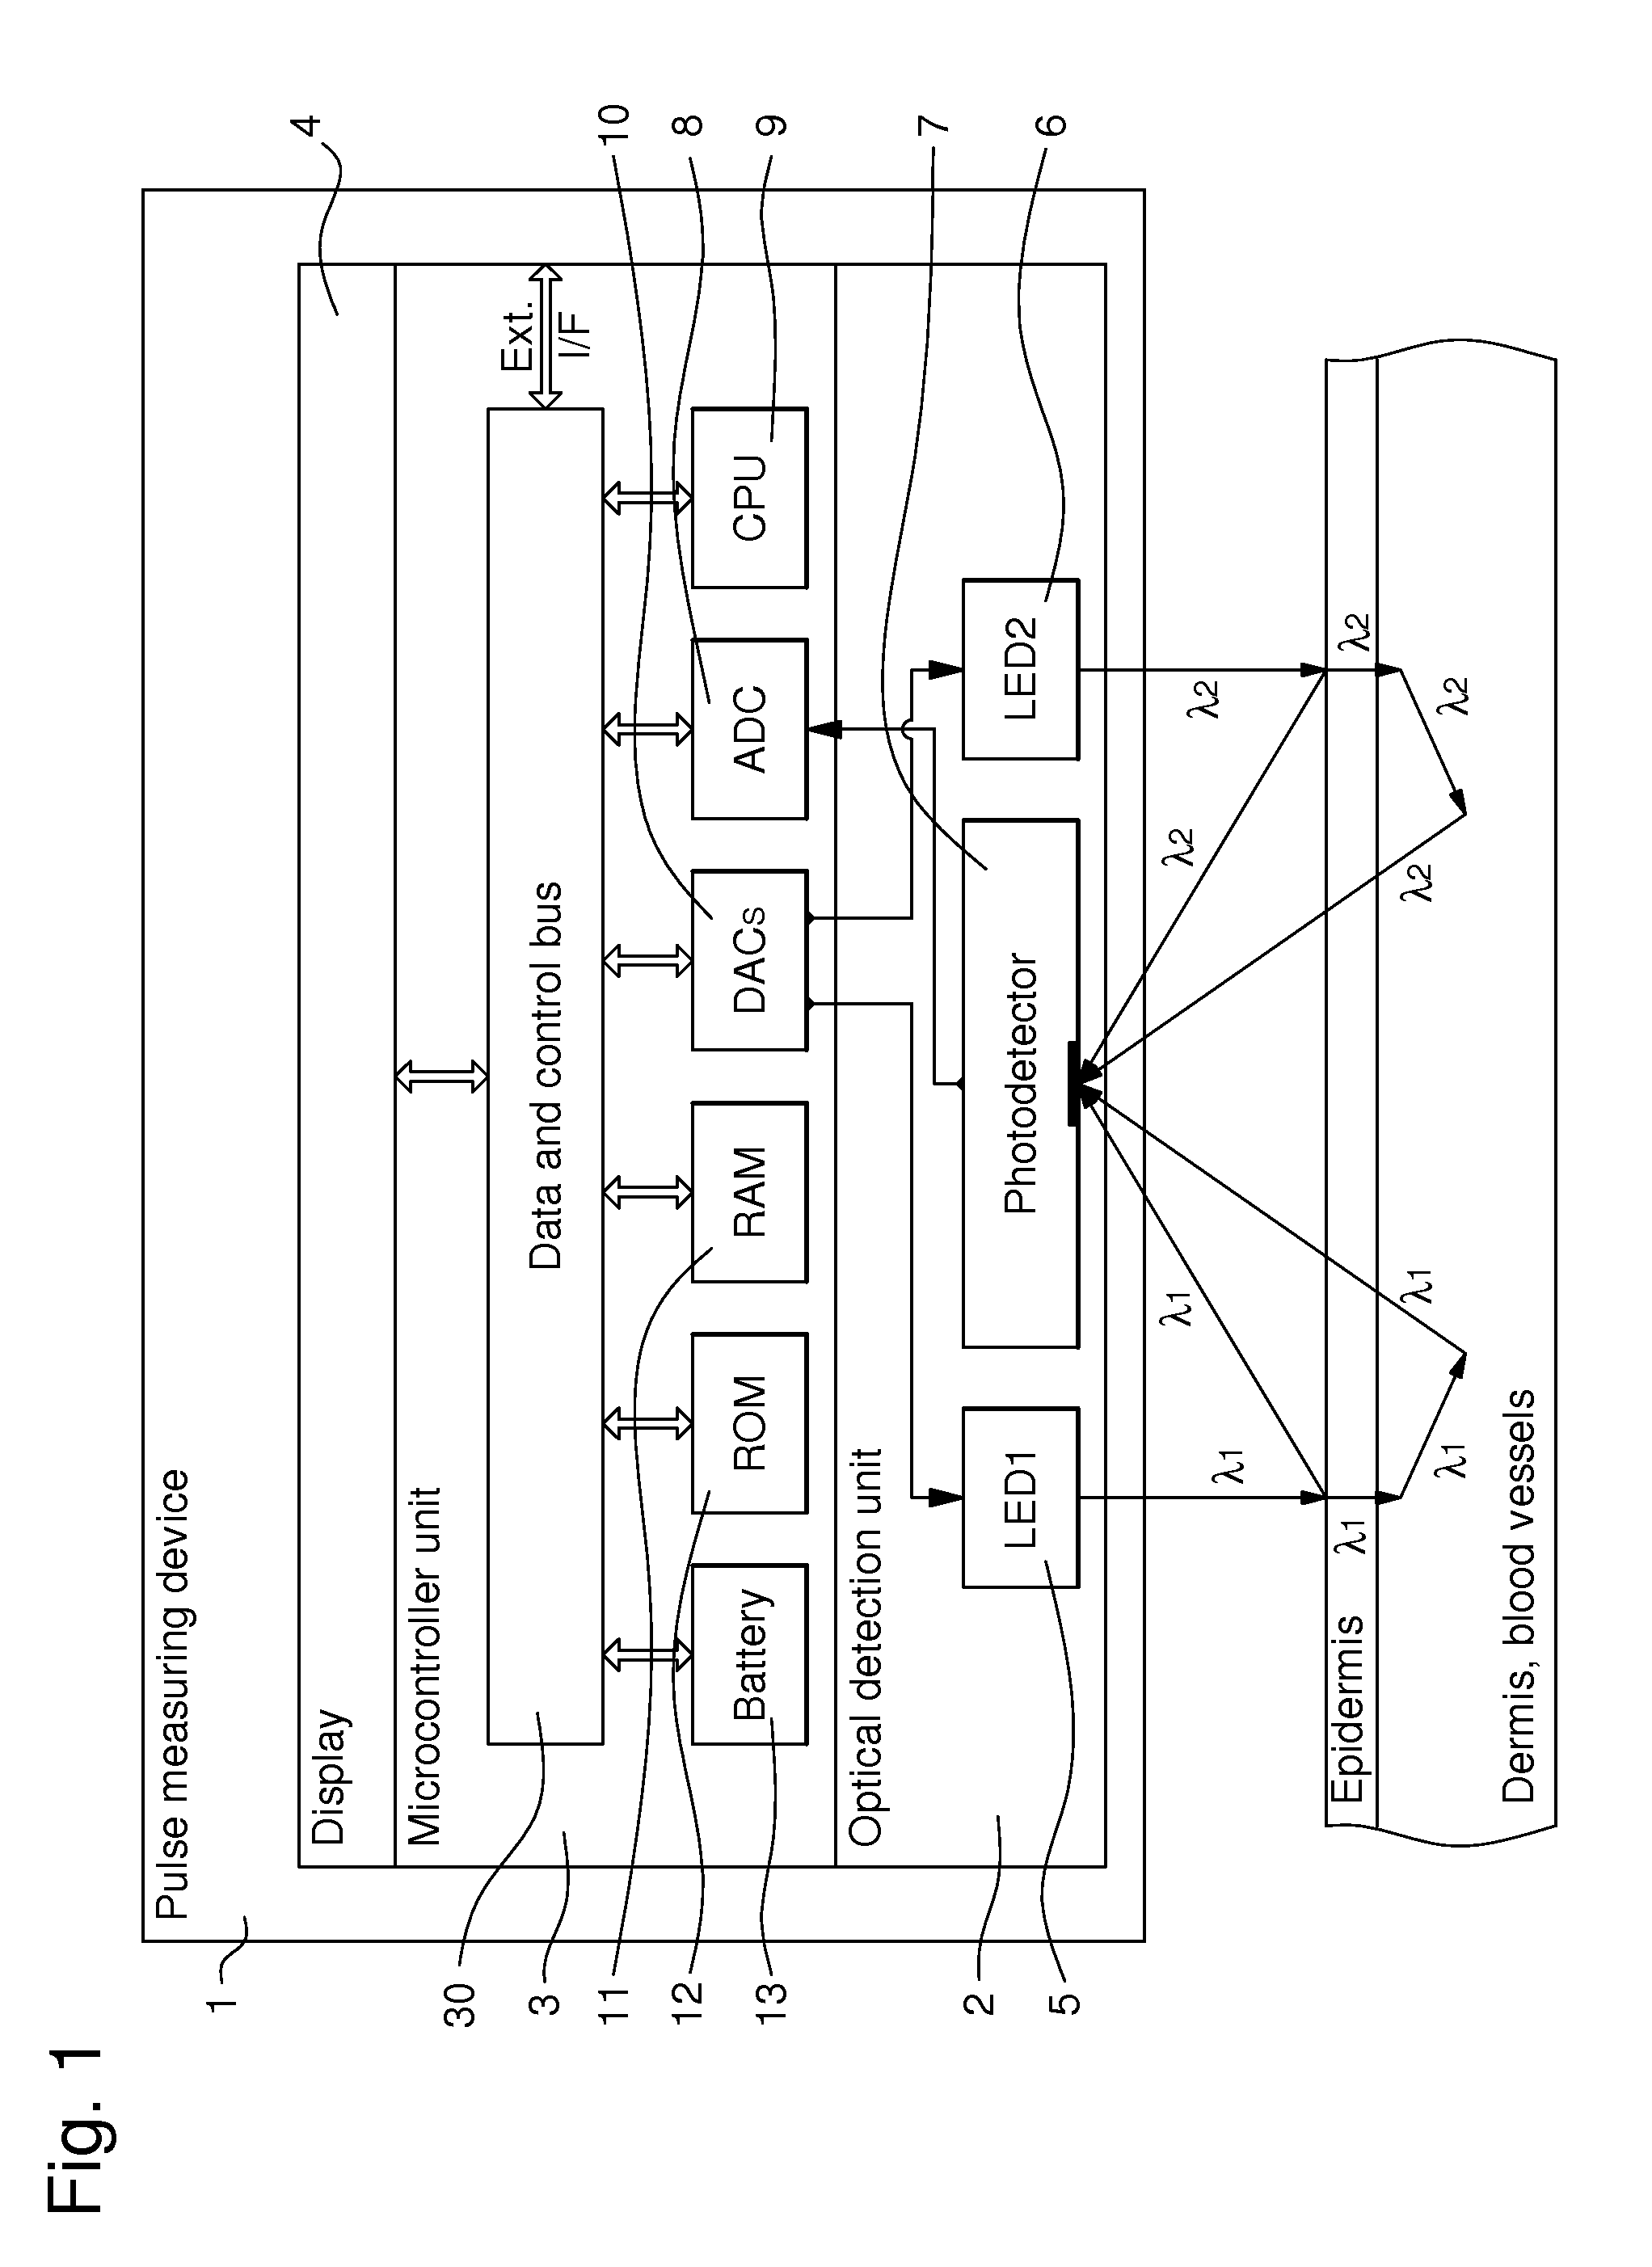 Method and device for measuring the pulse by means of light waves with two wavelengths